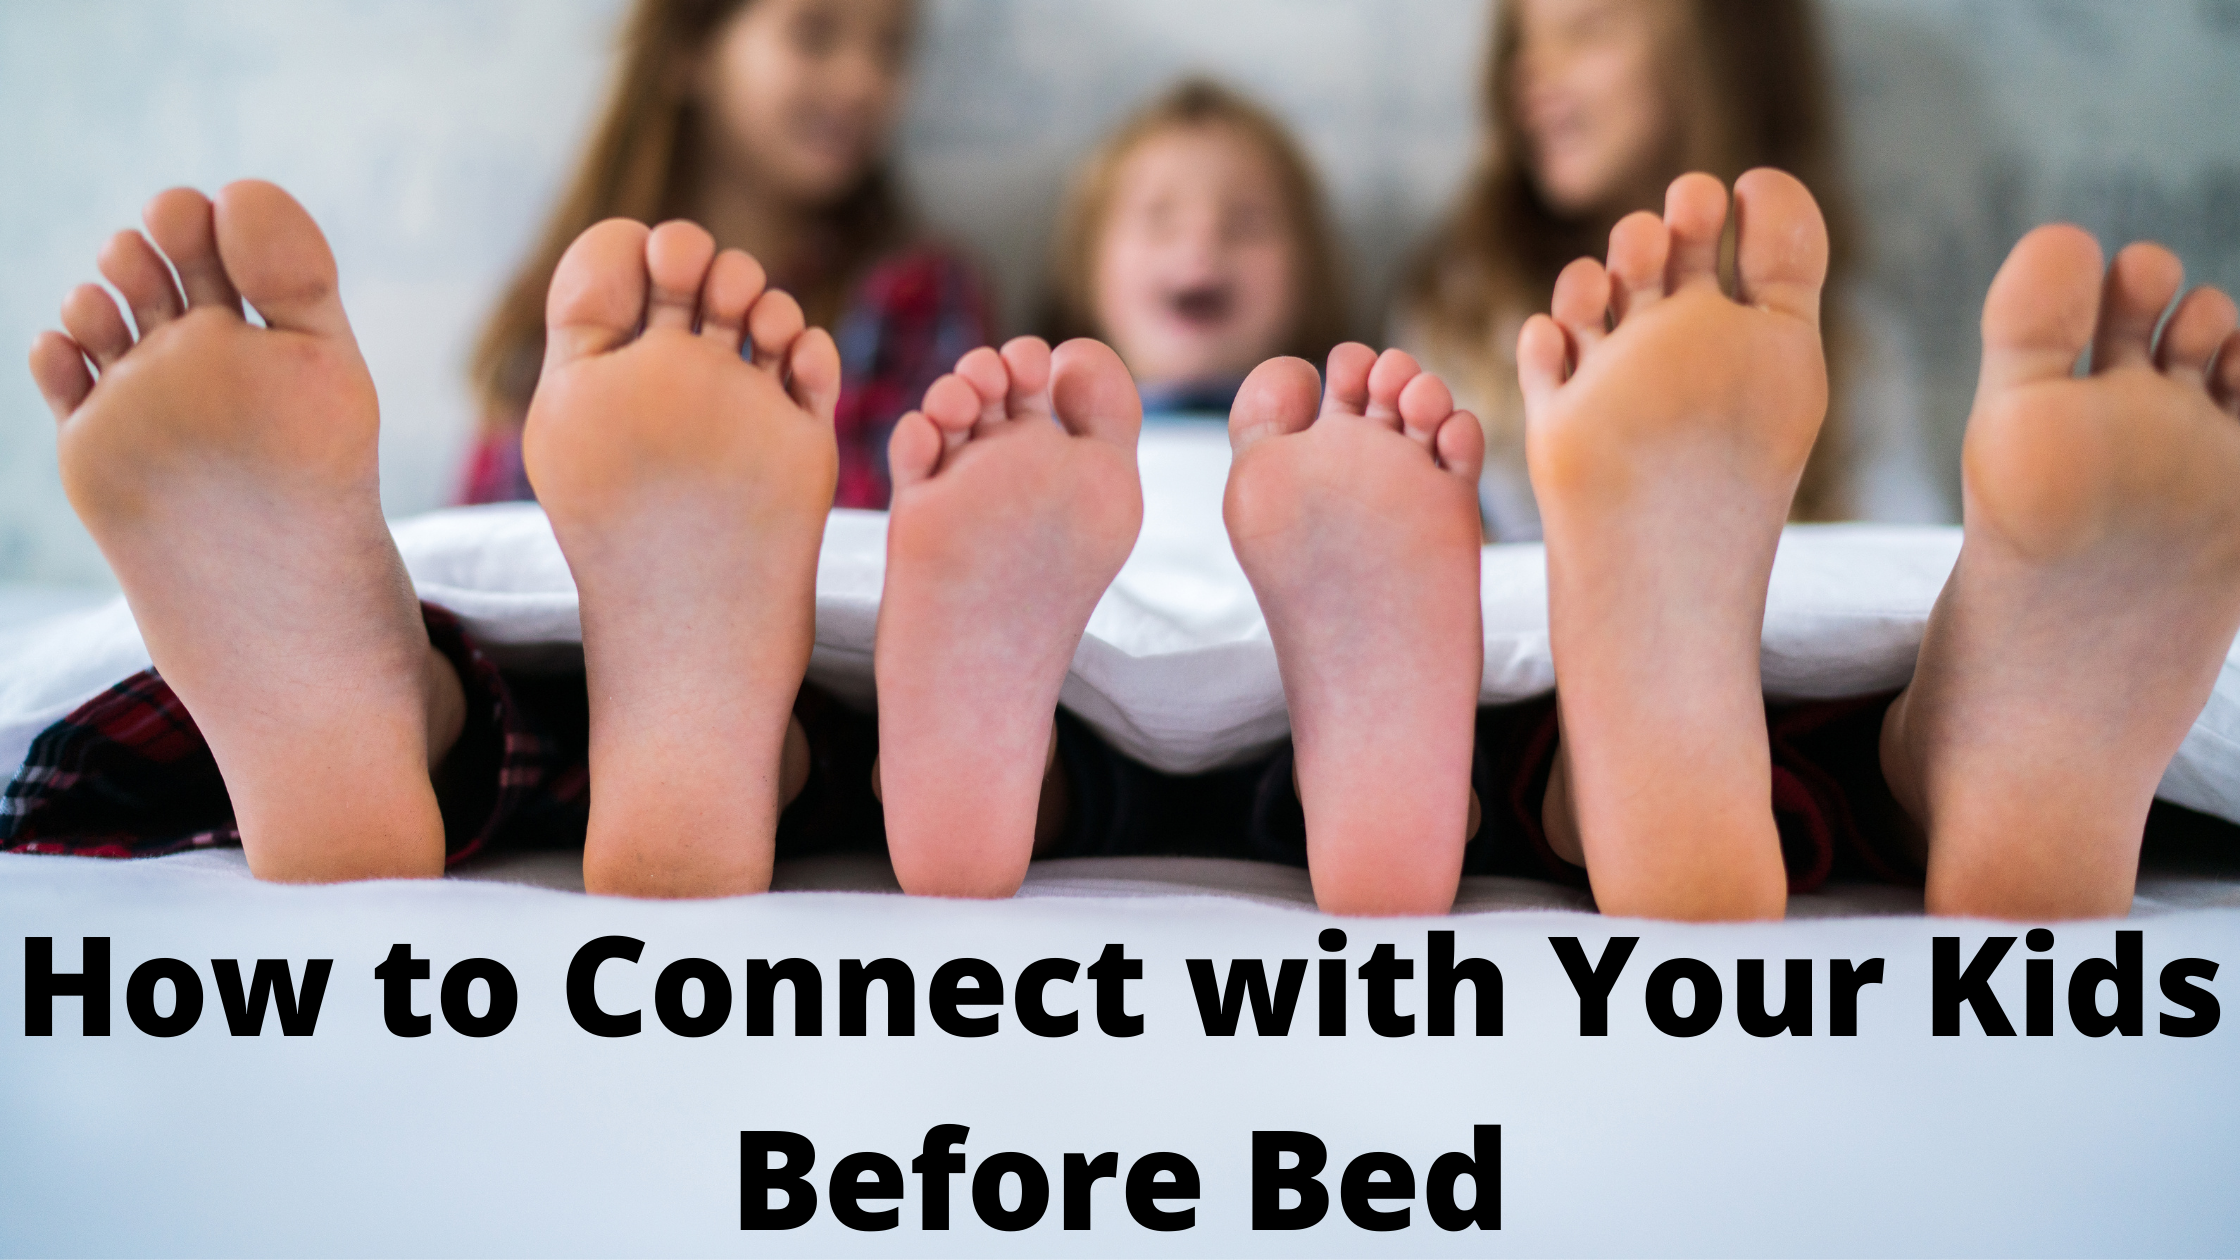 How to Connect with Your Kids Before Bed